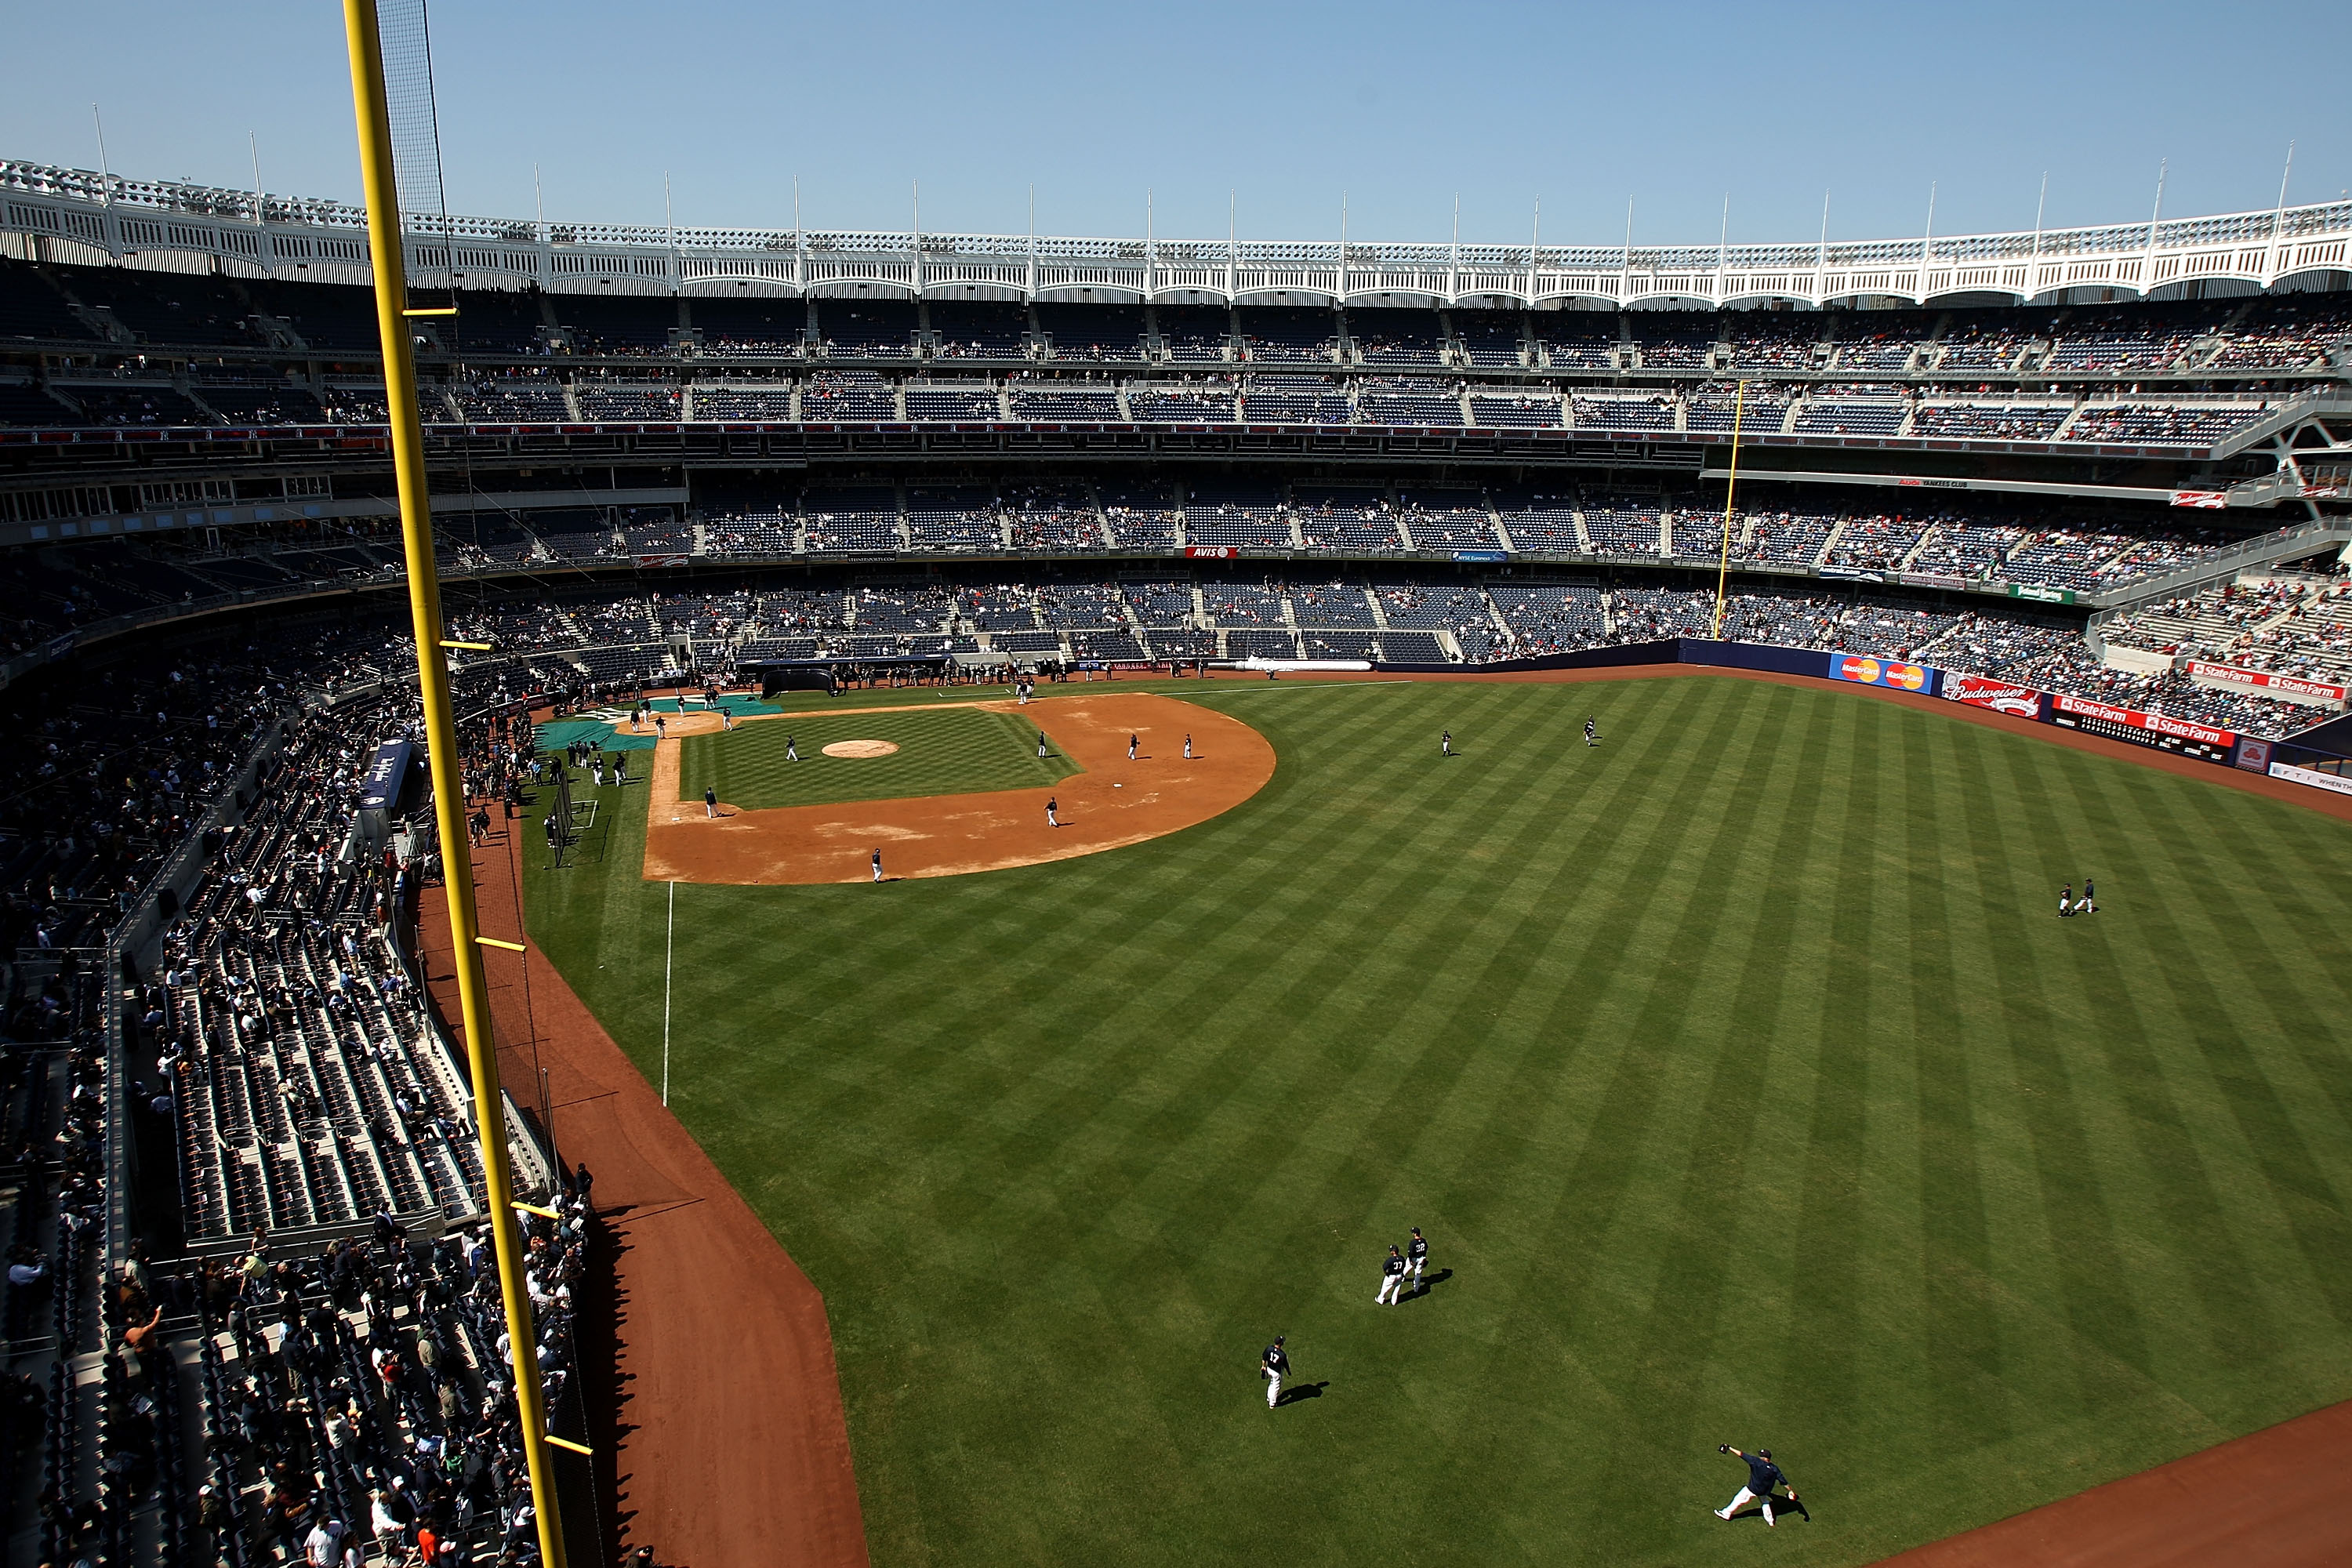 NEW YORK - APRIL 02:  A general view of the new Yankee Stadium from the right field stand during a New York Yankees workout on April 2, 2009 in the Bronx borough of New York City.  (Photo by Ezra Shaw/Getty Images)